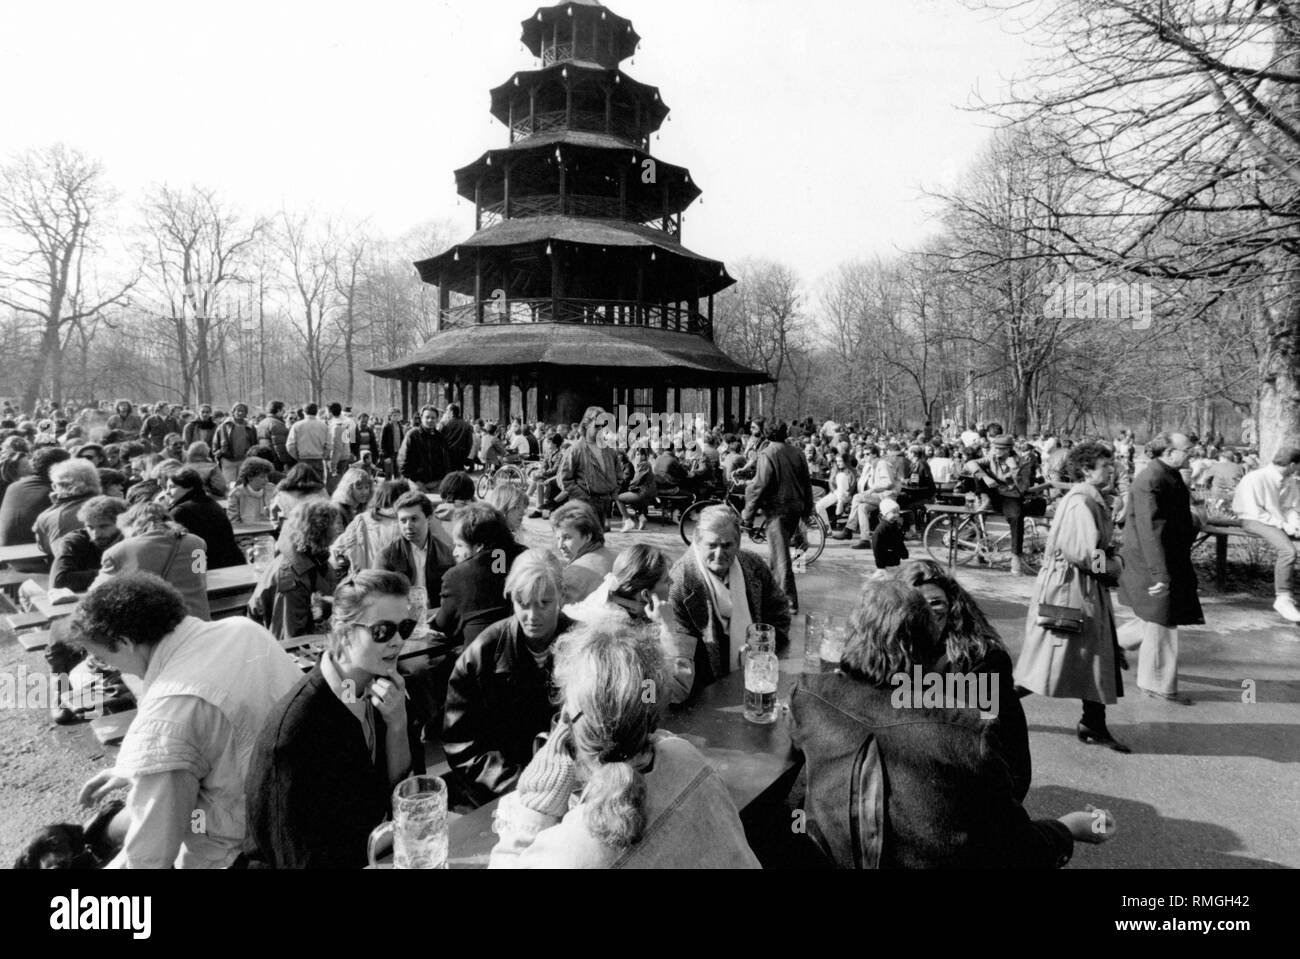 In spring many people are sitting in the beer garden at the Chinese Tower in the Englischer Garten in Munich. Stock Photo